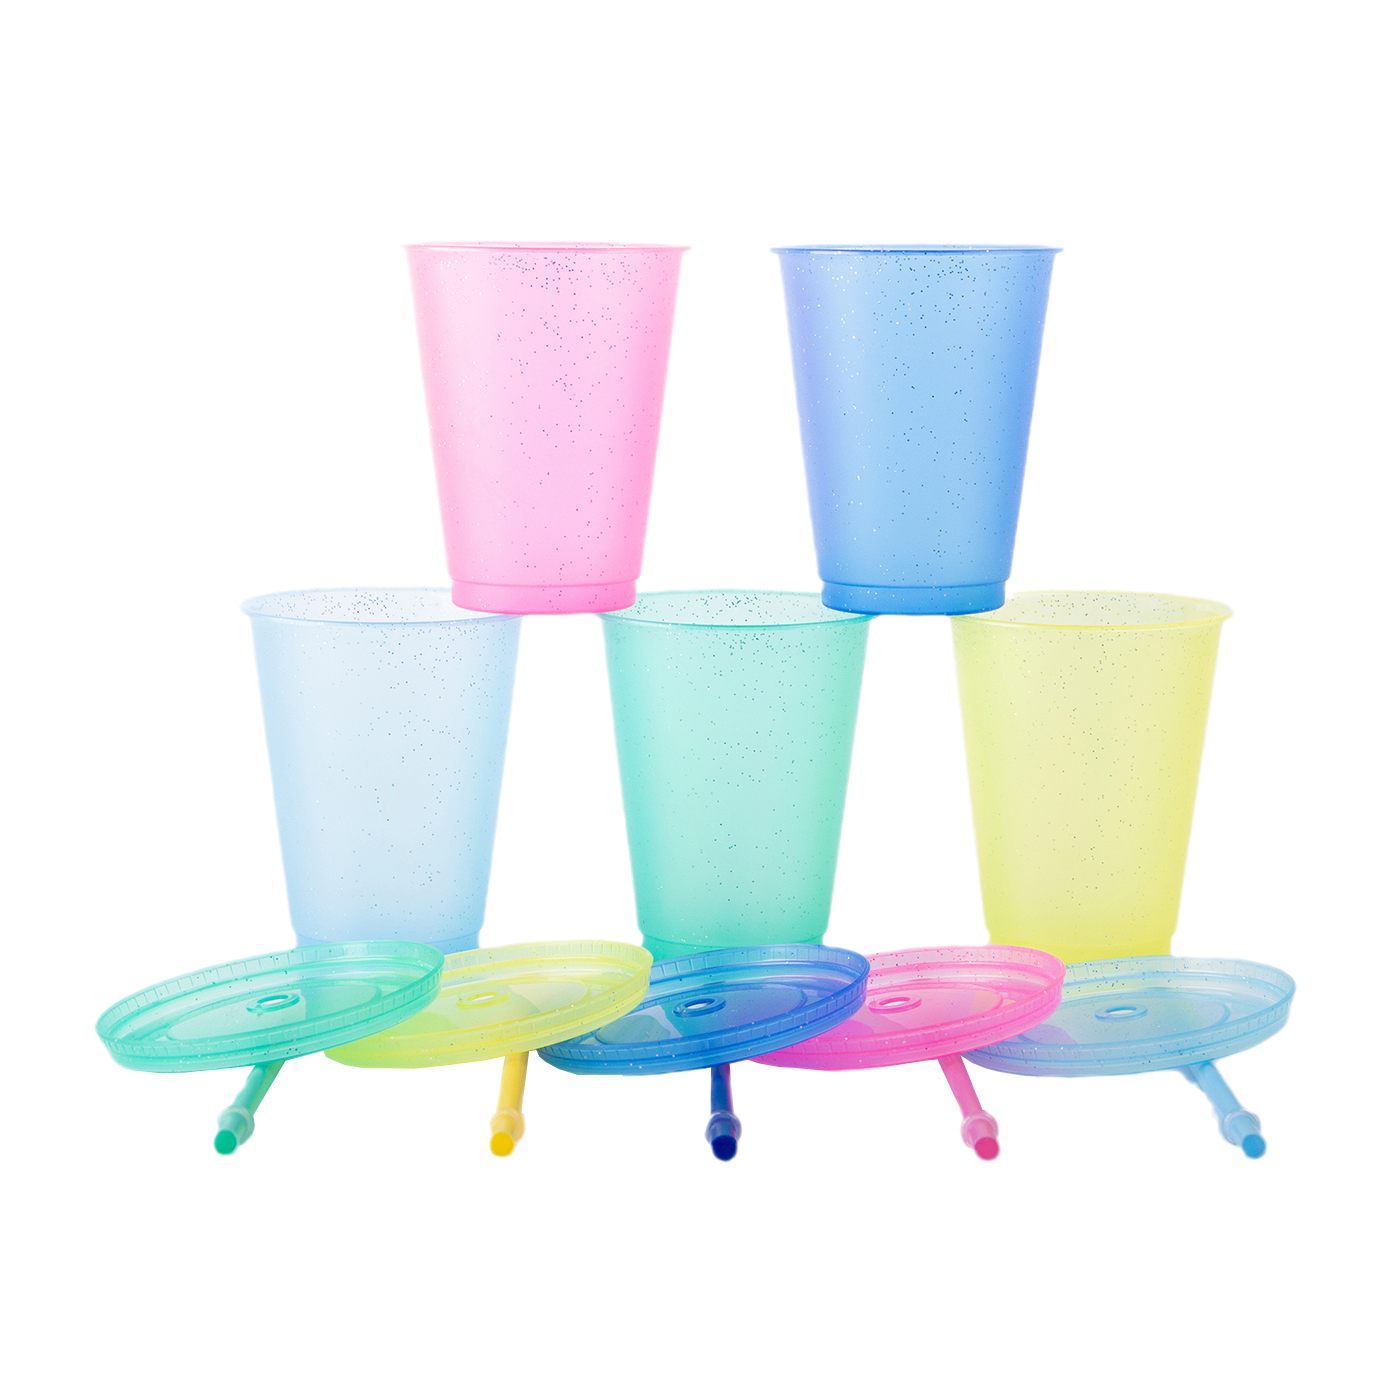 16 oz. Travel Cup With Lid And Straw2